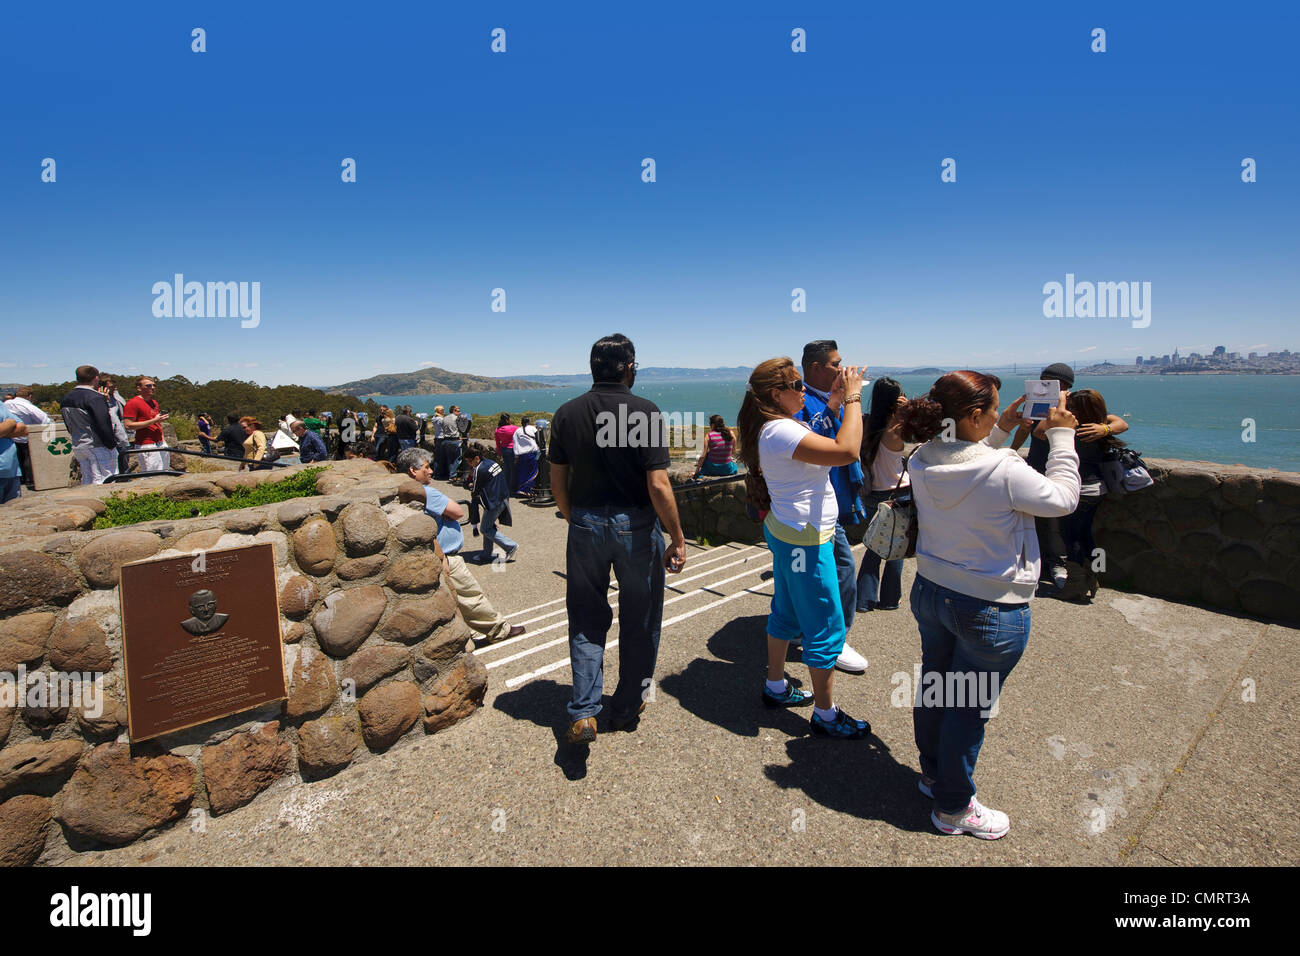 Tourists at Golden Gate Bridge from Marin County California Pacific Coast Highway coastline panoramic surf sea NorCal Stock Photo